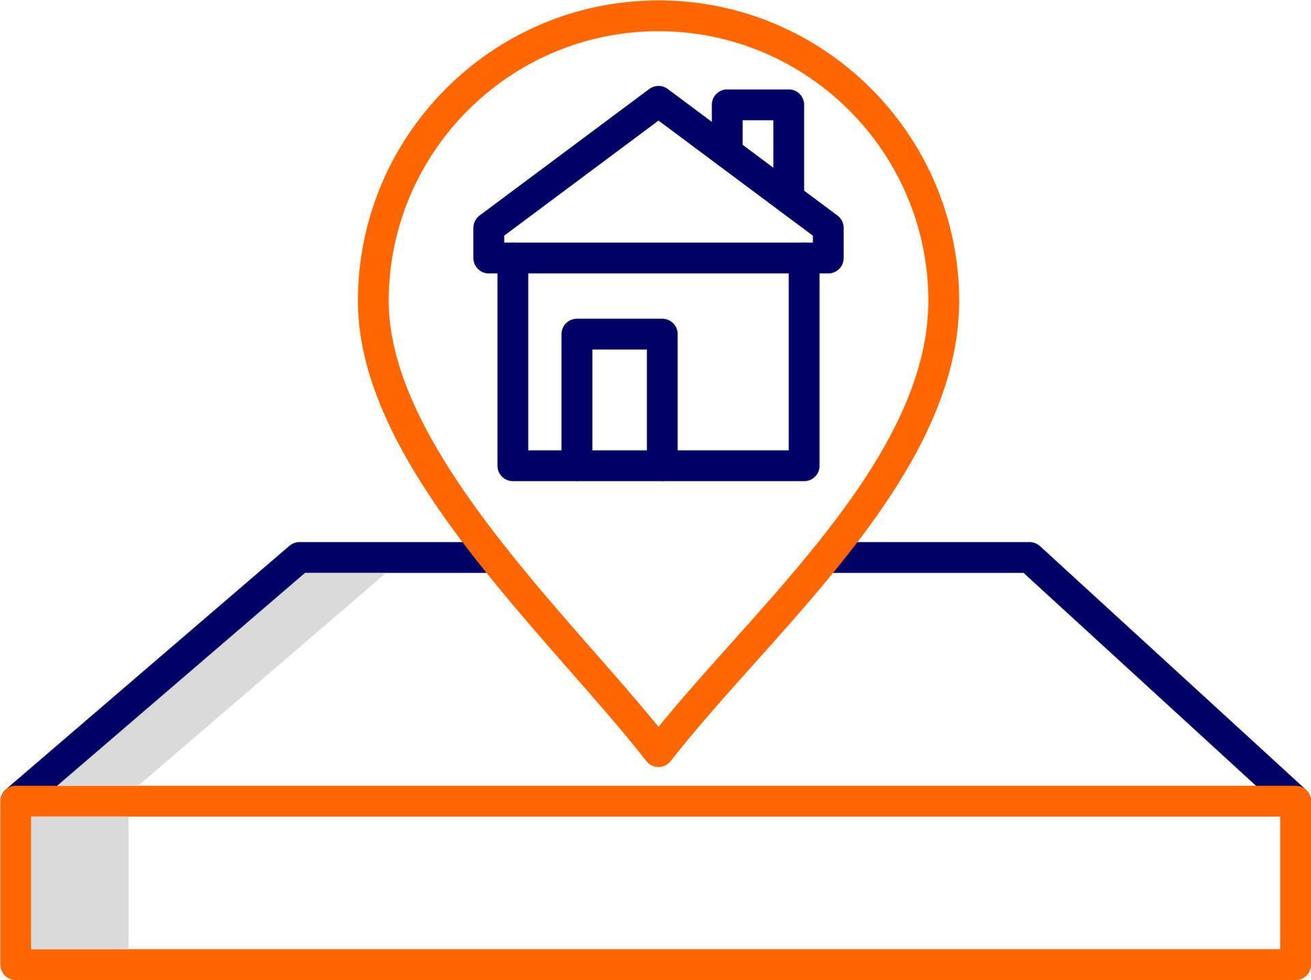 House Location Pin Vector Icon